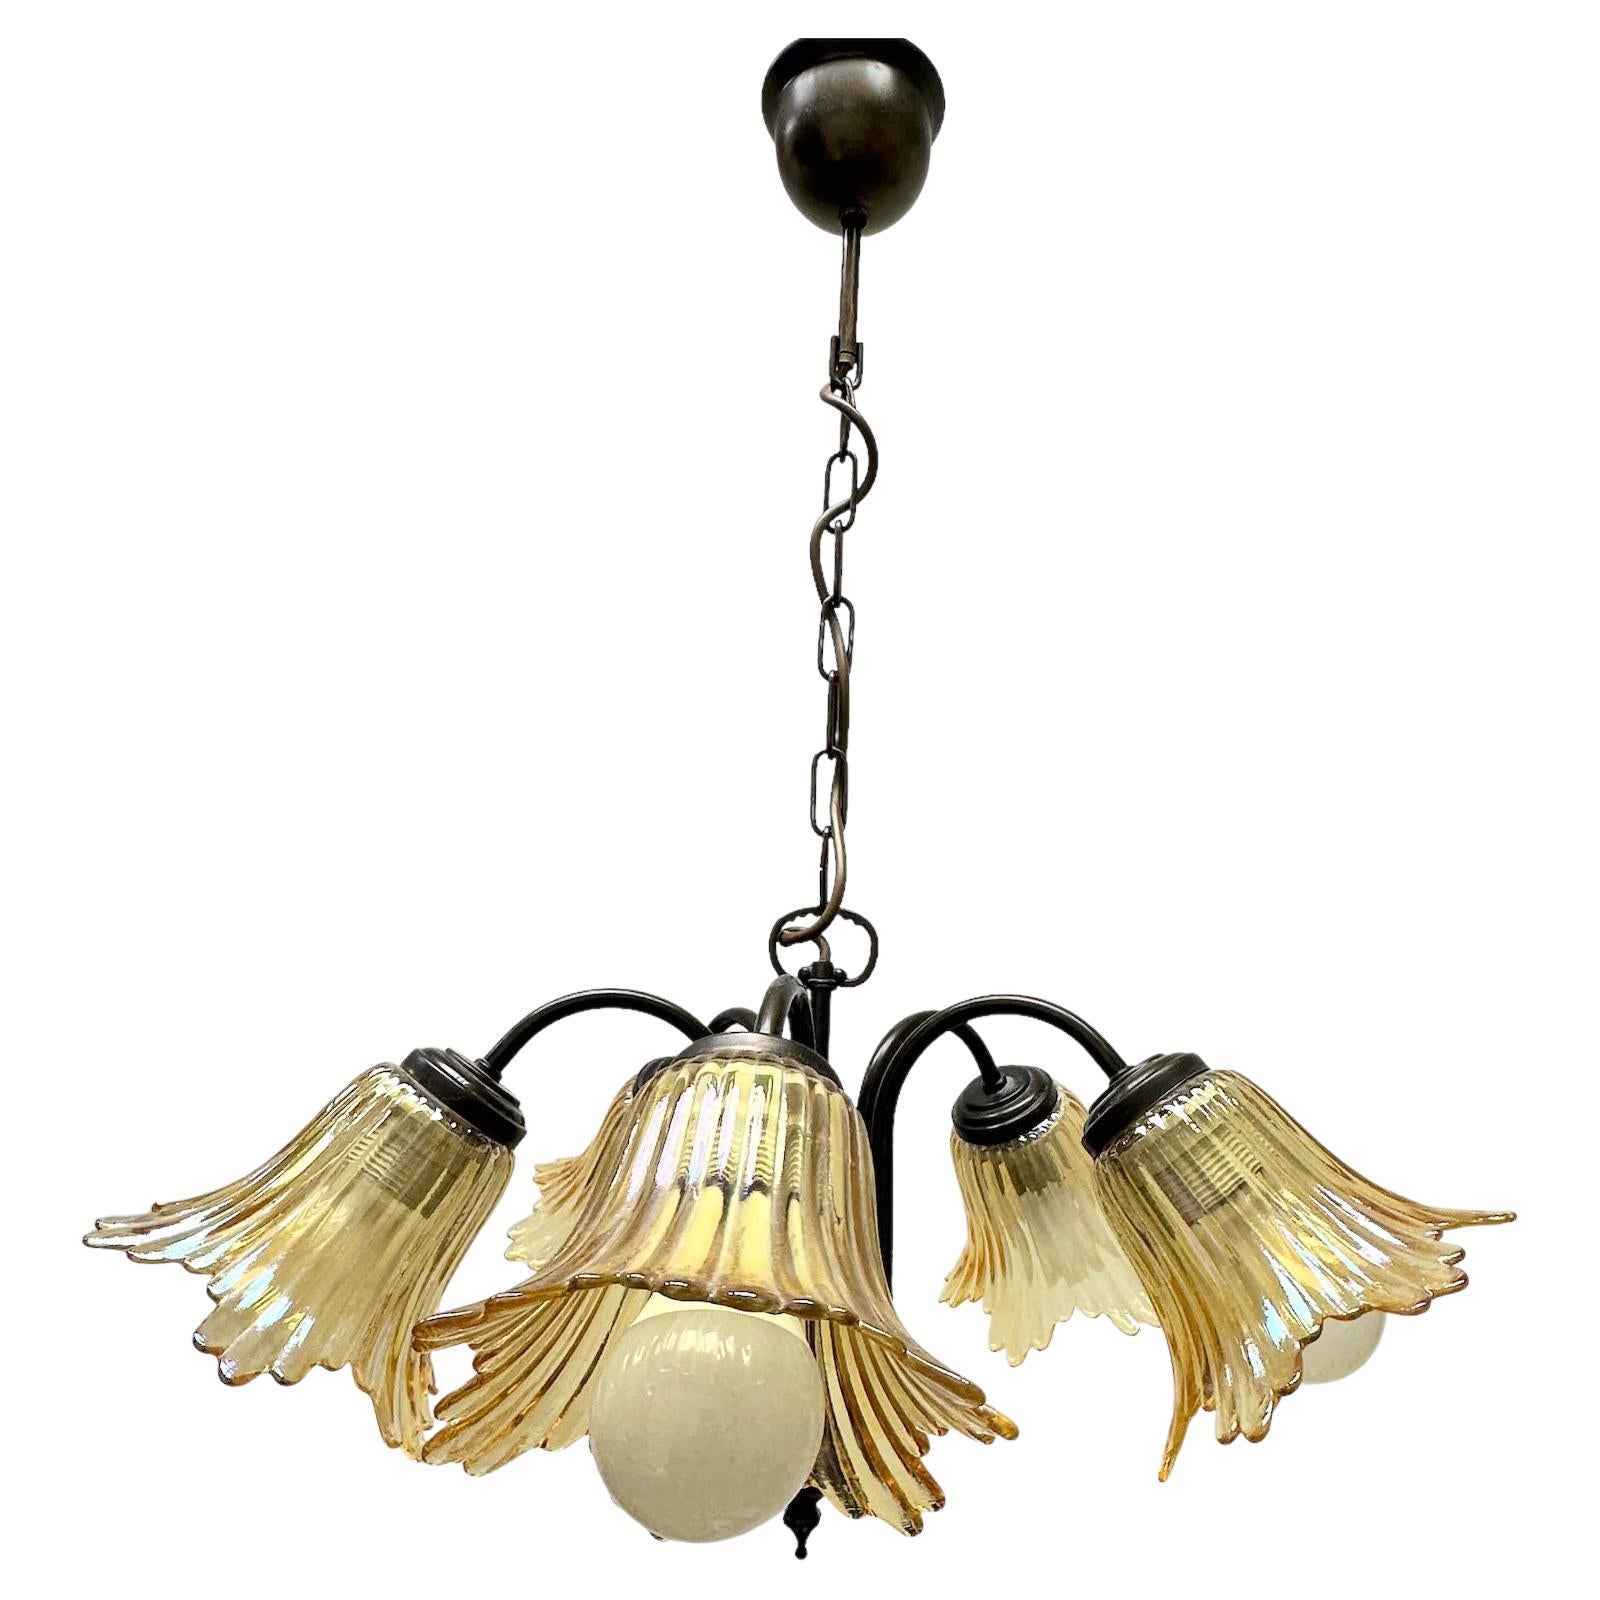 Gorgeous German Tole Wood Metal Glas Shade Five Light Chandelier, 1970s For Sale